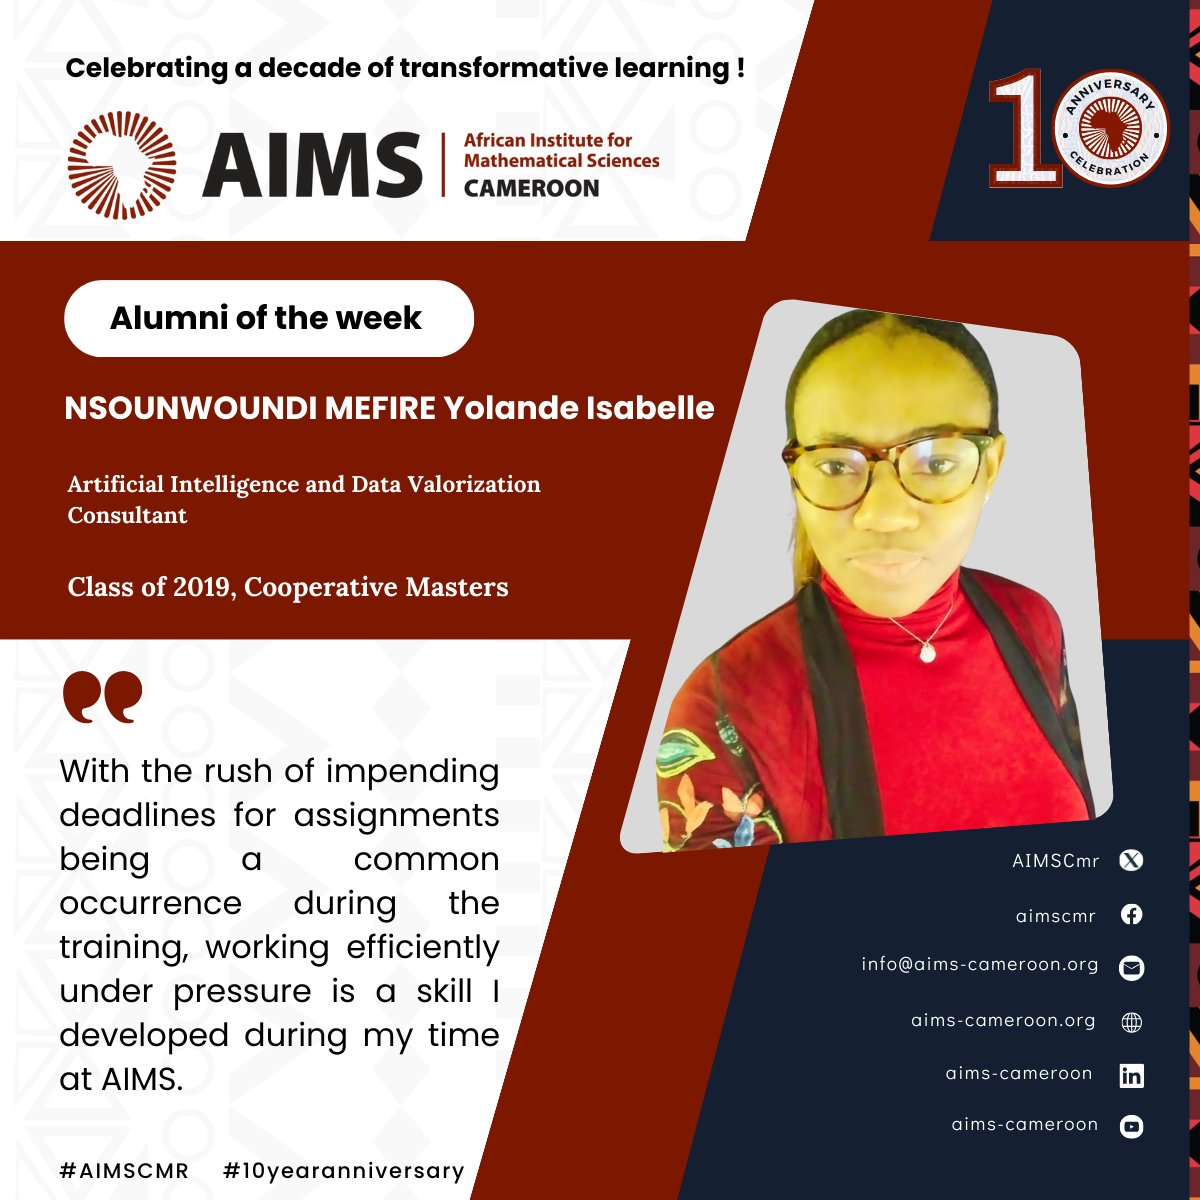 Meet our alumna of the week, NSOUNWOUNDI MEFIRE Yolande Isabelle, alumna to AIMS Cameroon (Cooperative Master’s Class of 2019) and holder of a MSc degree in Computer Science from the University Laval (Canada). #AIMSCMR #decadeofexcellence #10yearanniversary #alumni #AIMS